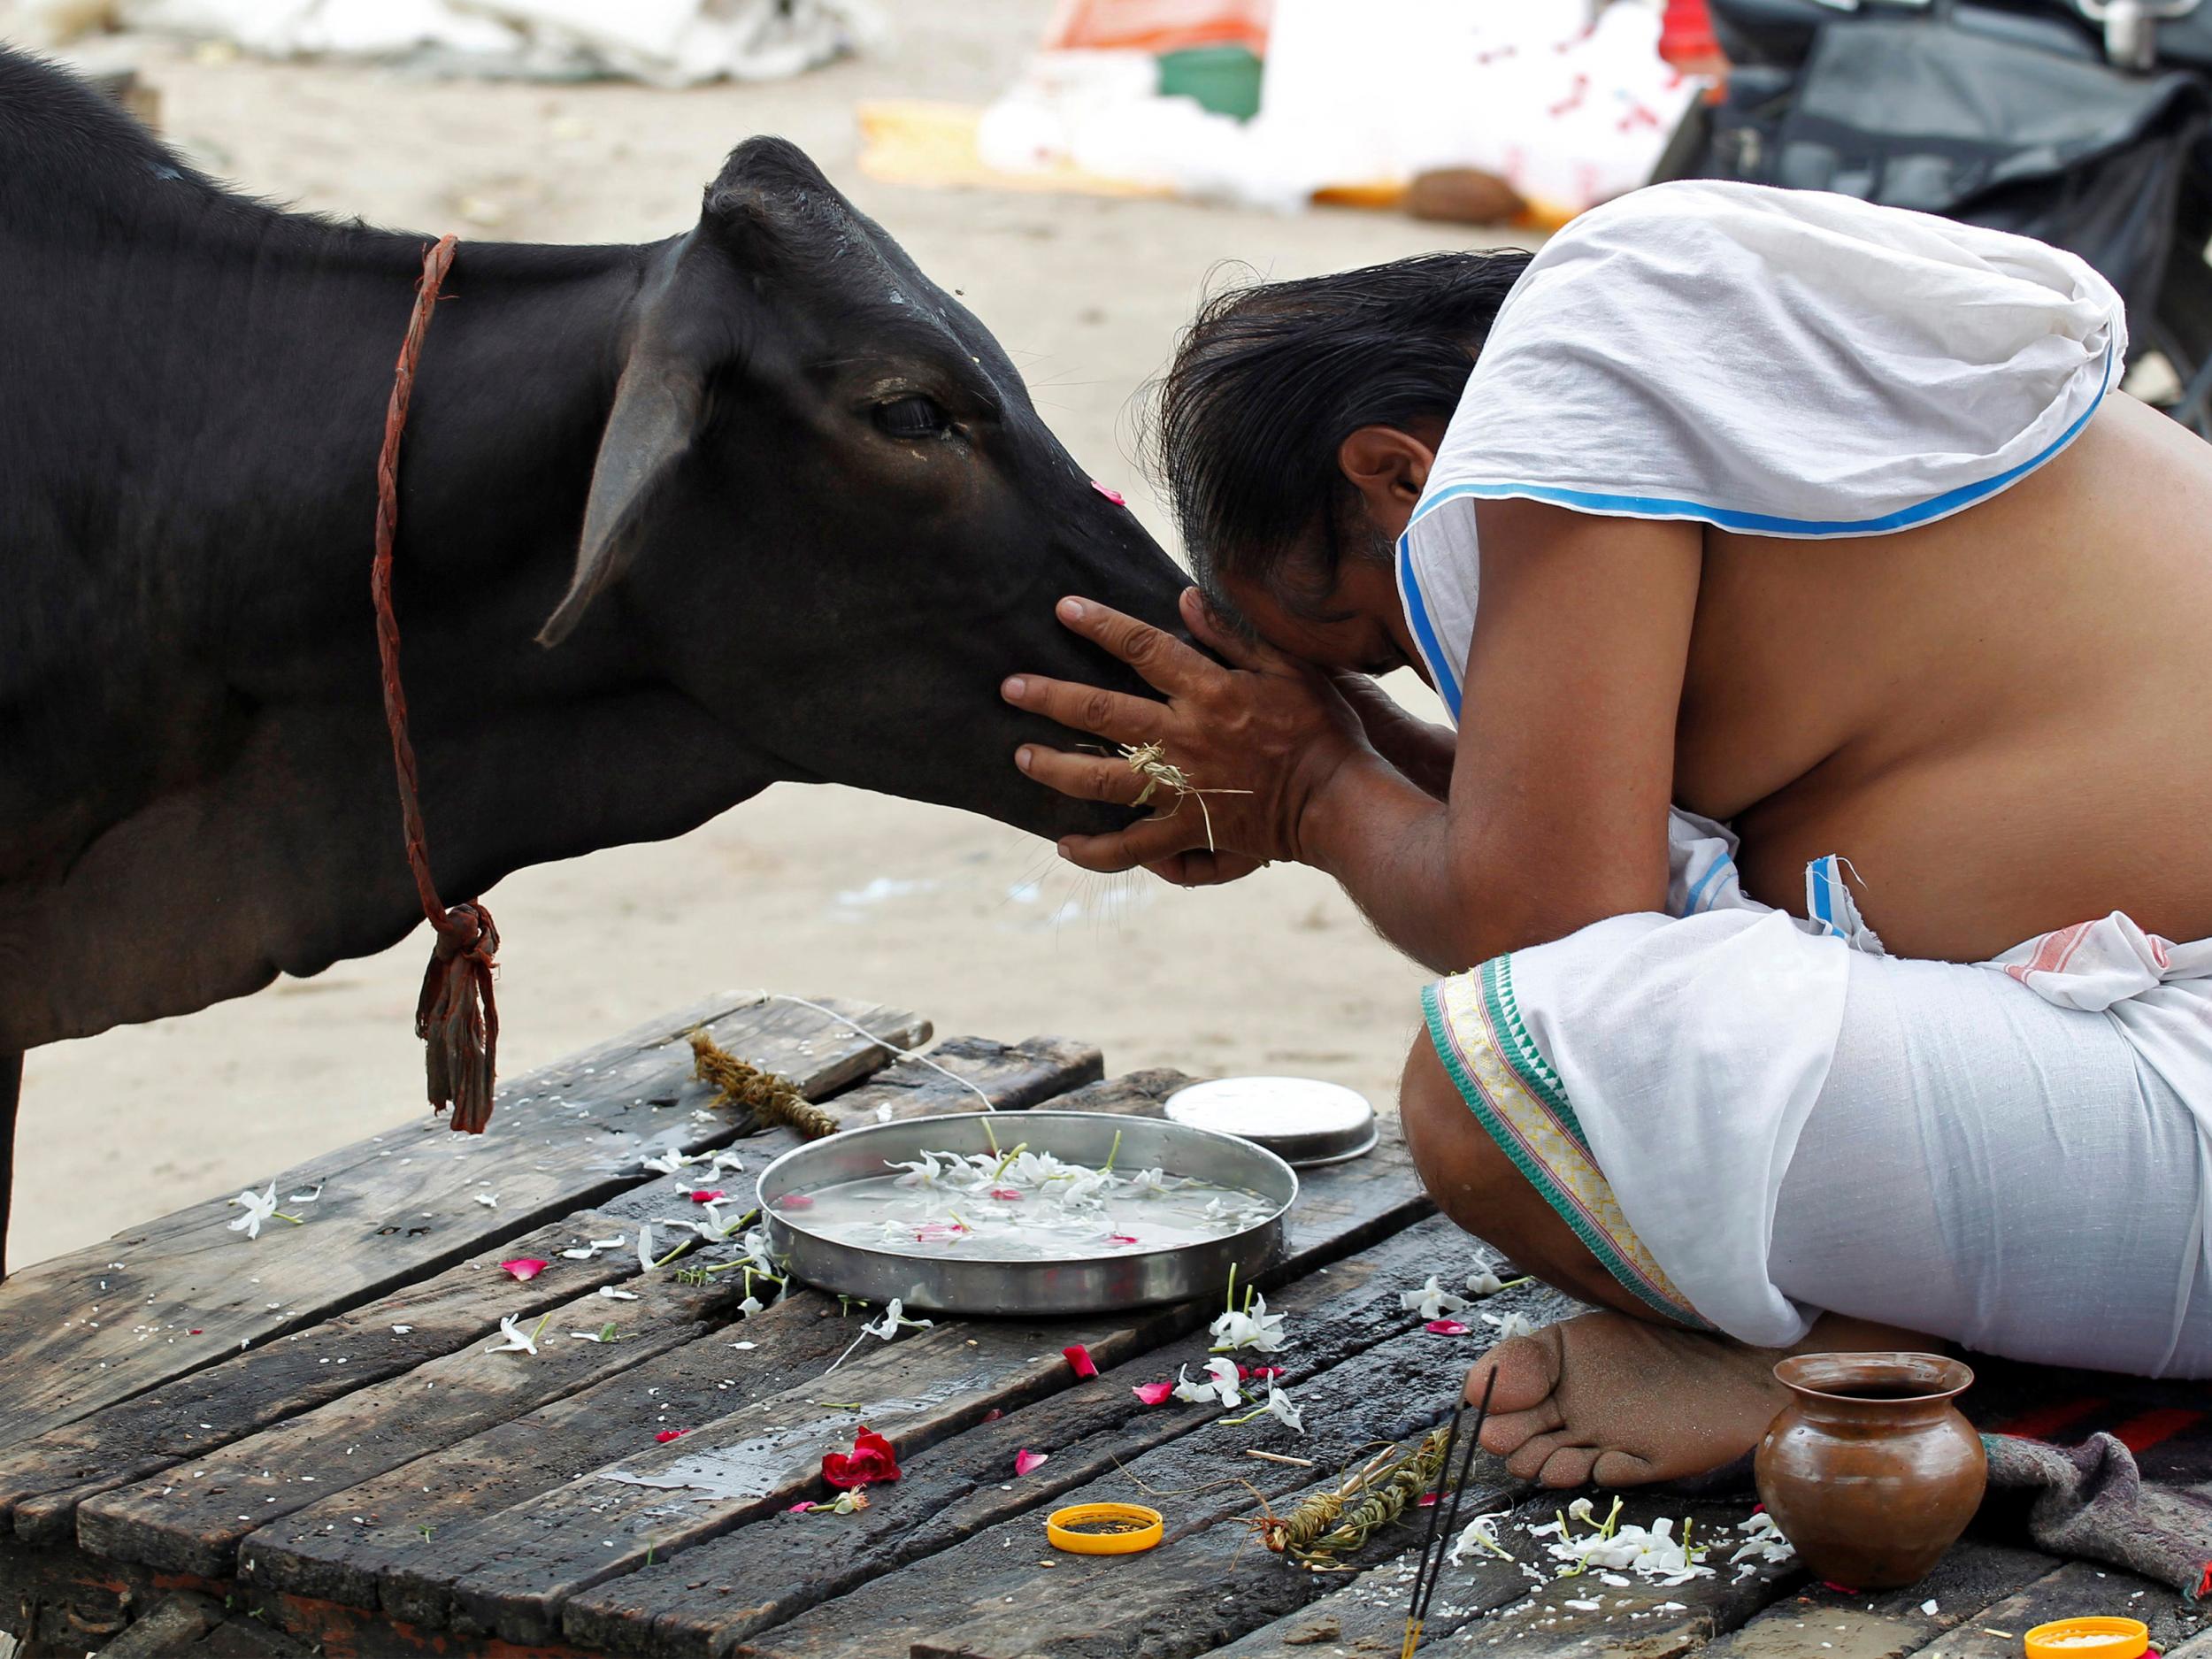 Cows are considered sacred in the Hindu-majority country, and slaughtering cows or eating beef is illegal or restricted across much of the country